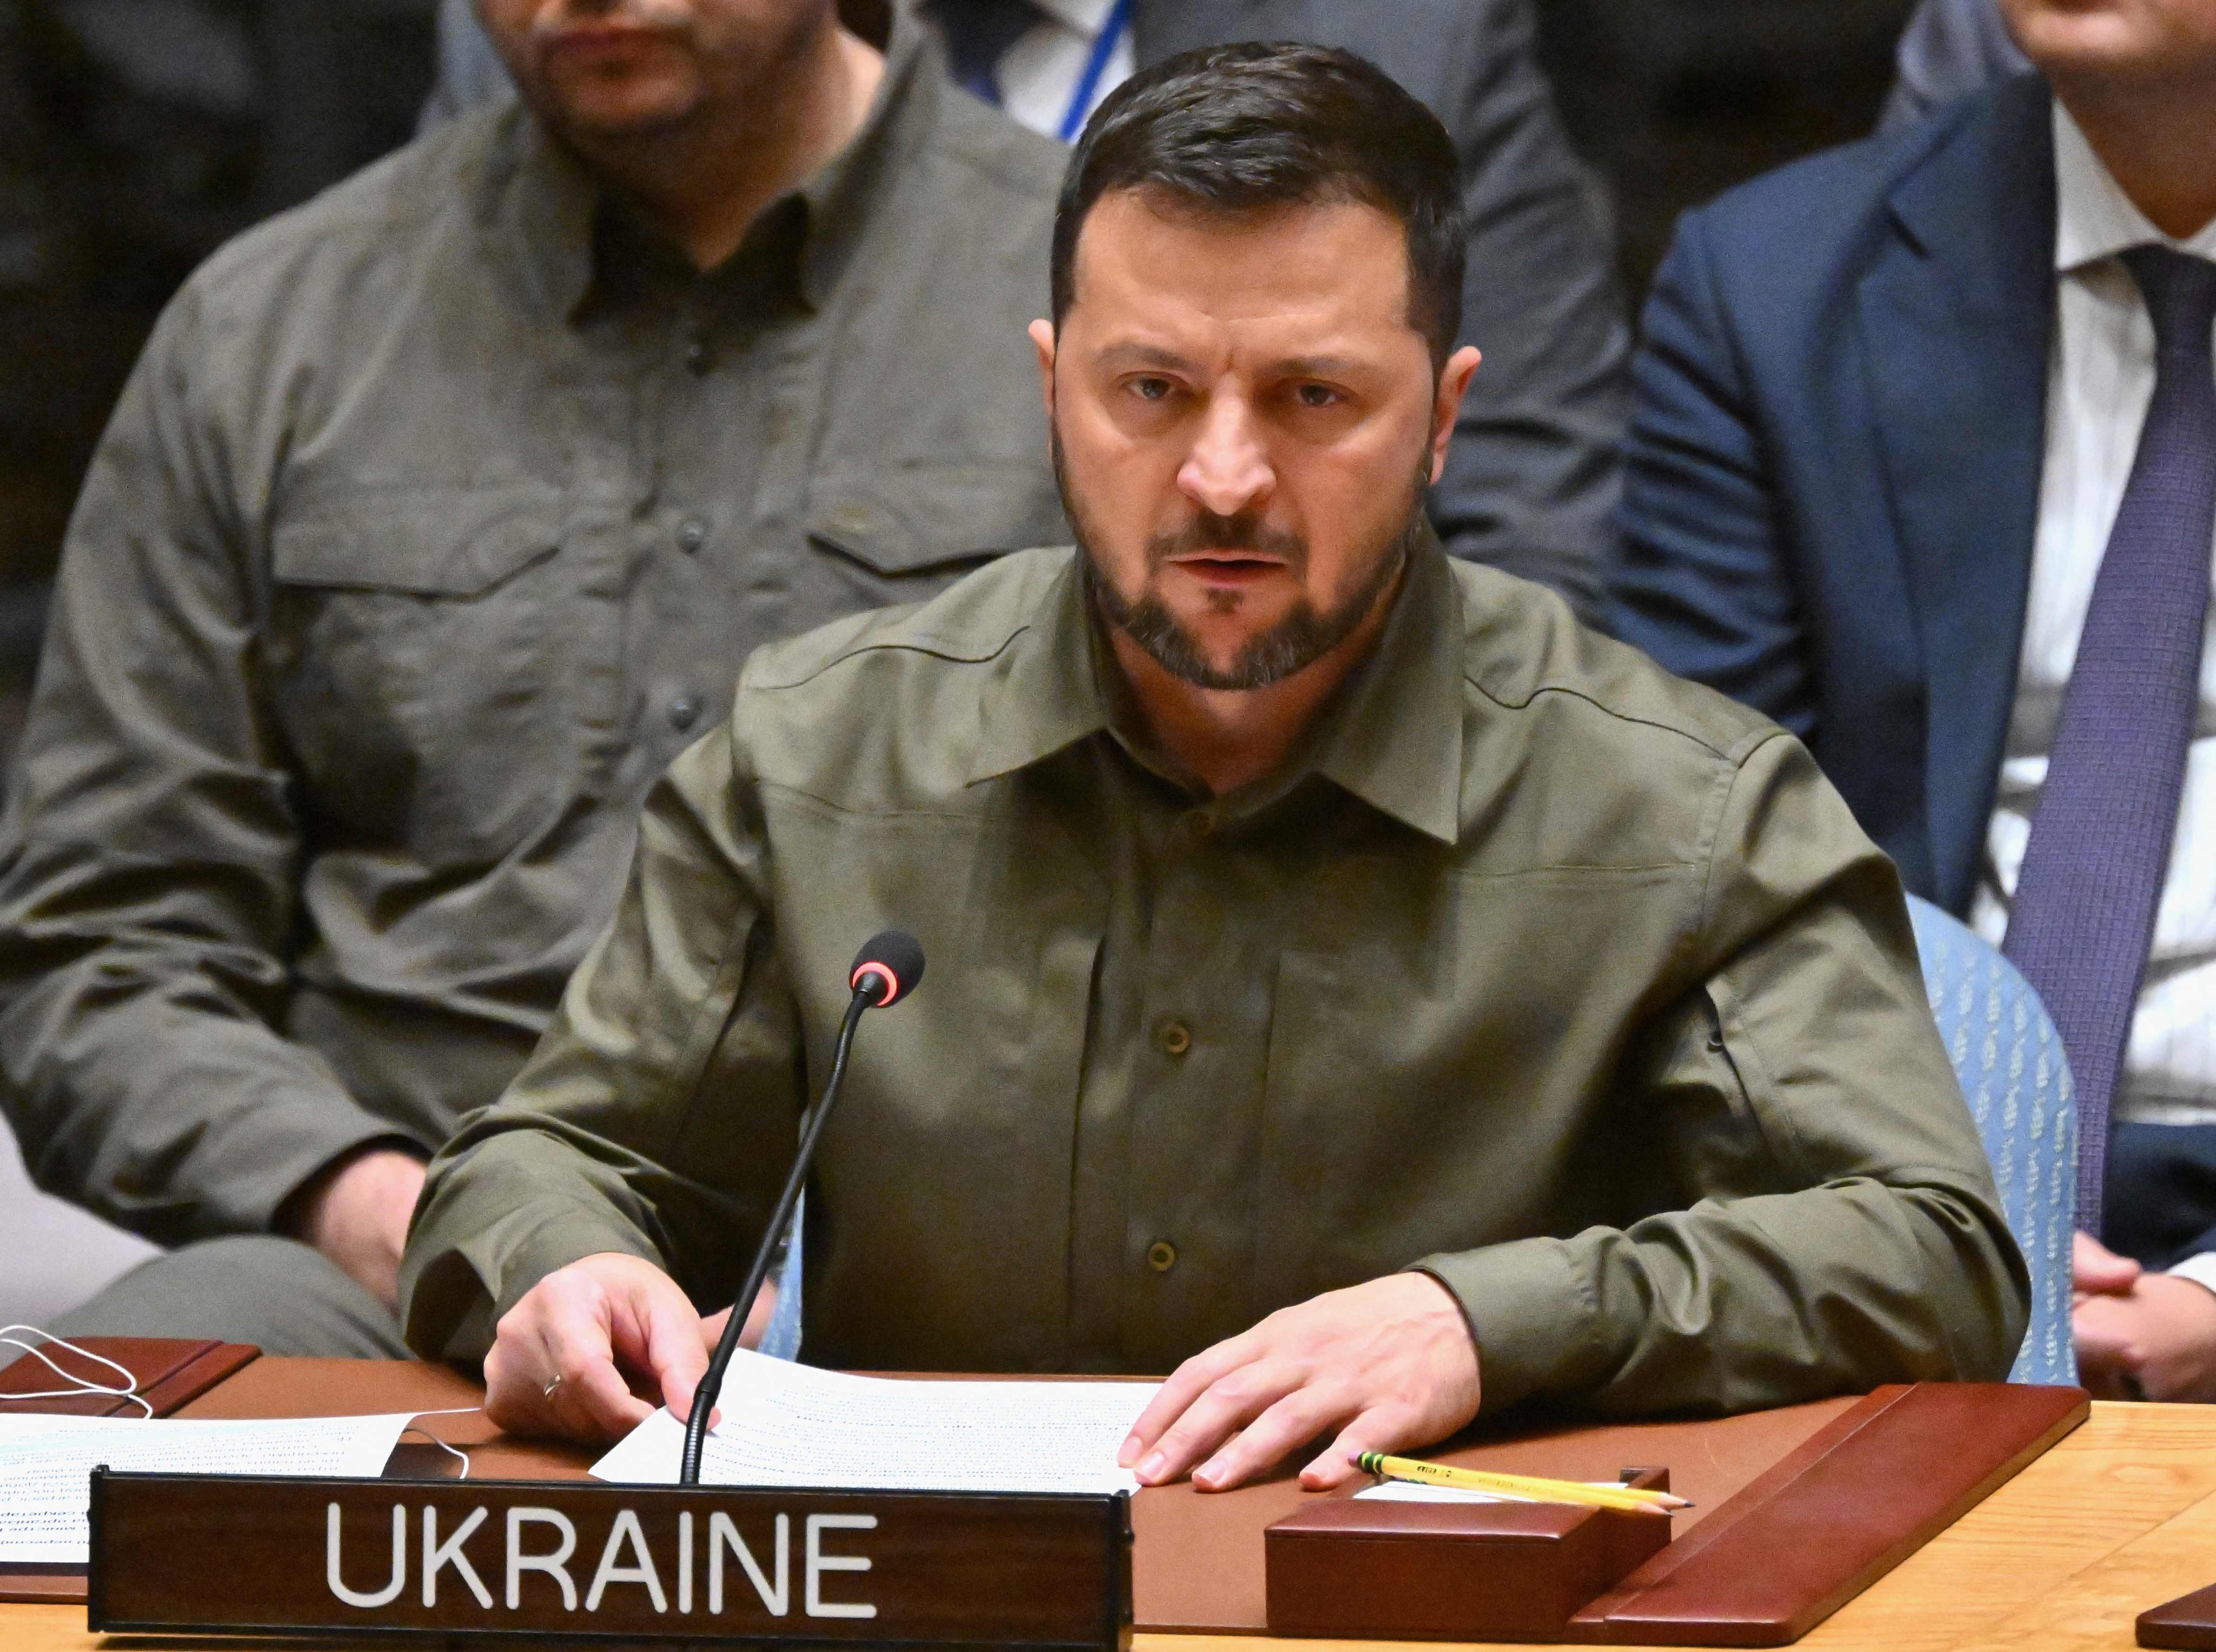 Ukrainian President Volodymyr Zelensky speaks at a UN Security Council meeting in New York on Wednesday. Photo: AFP